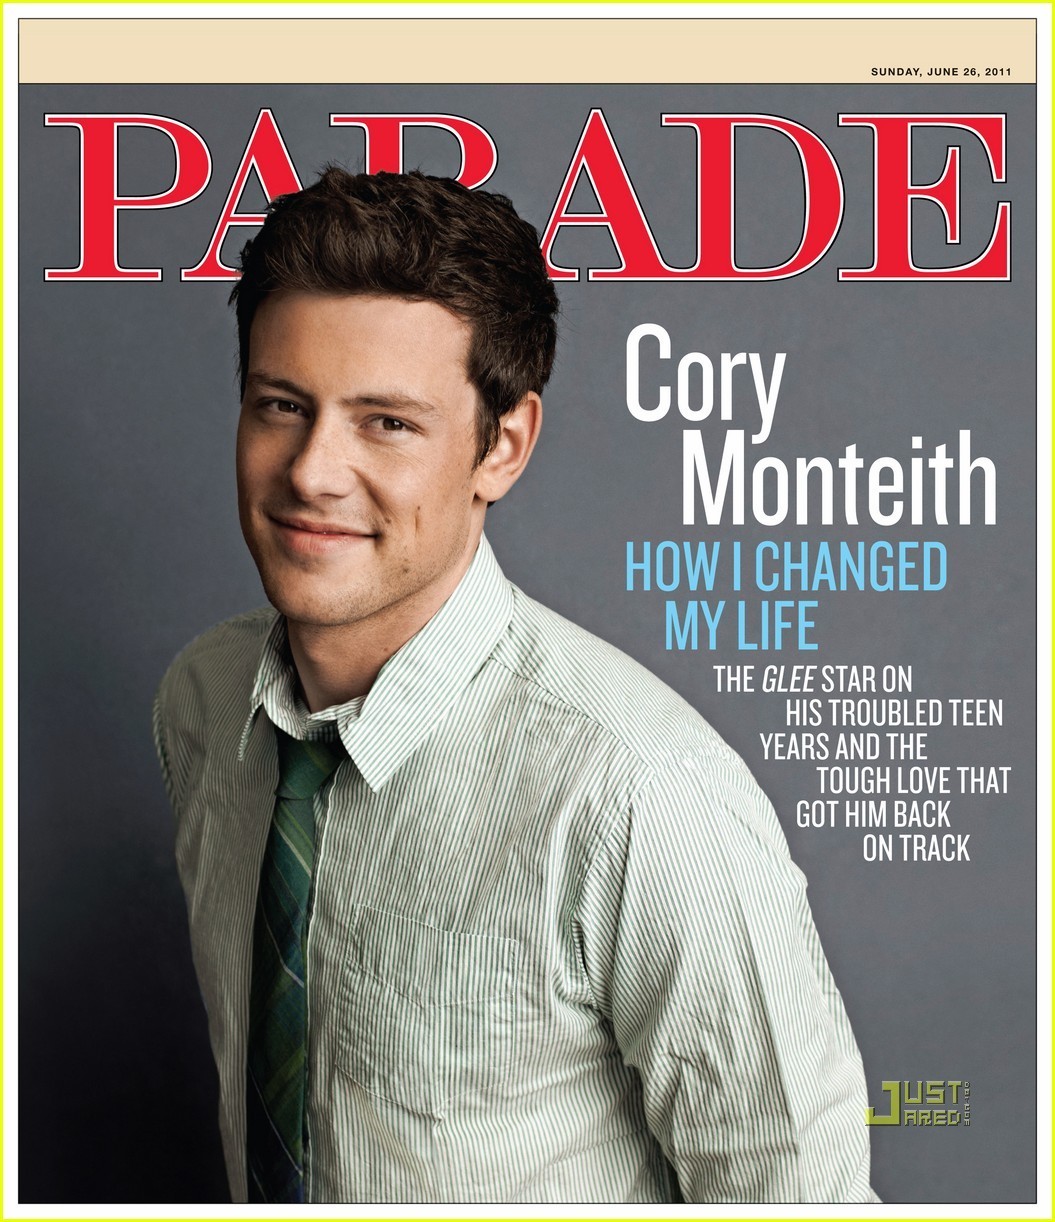 Cory Monteith - Images